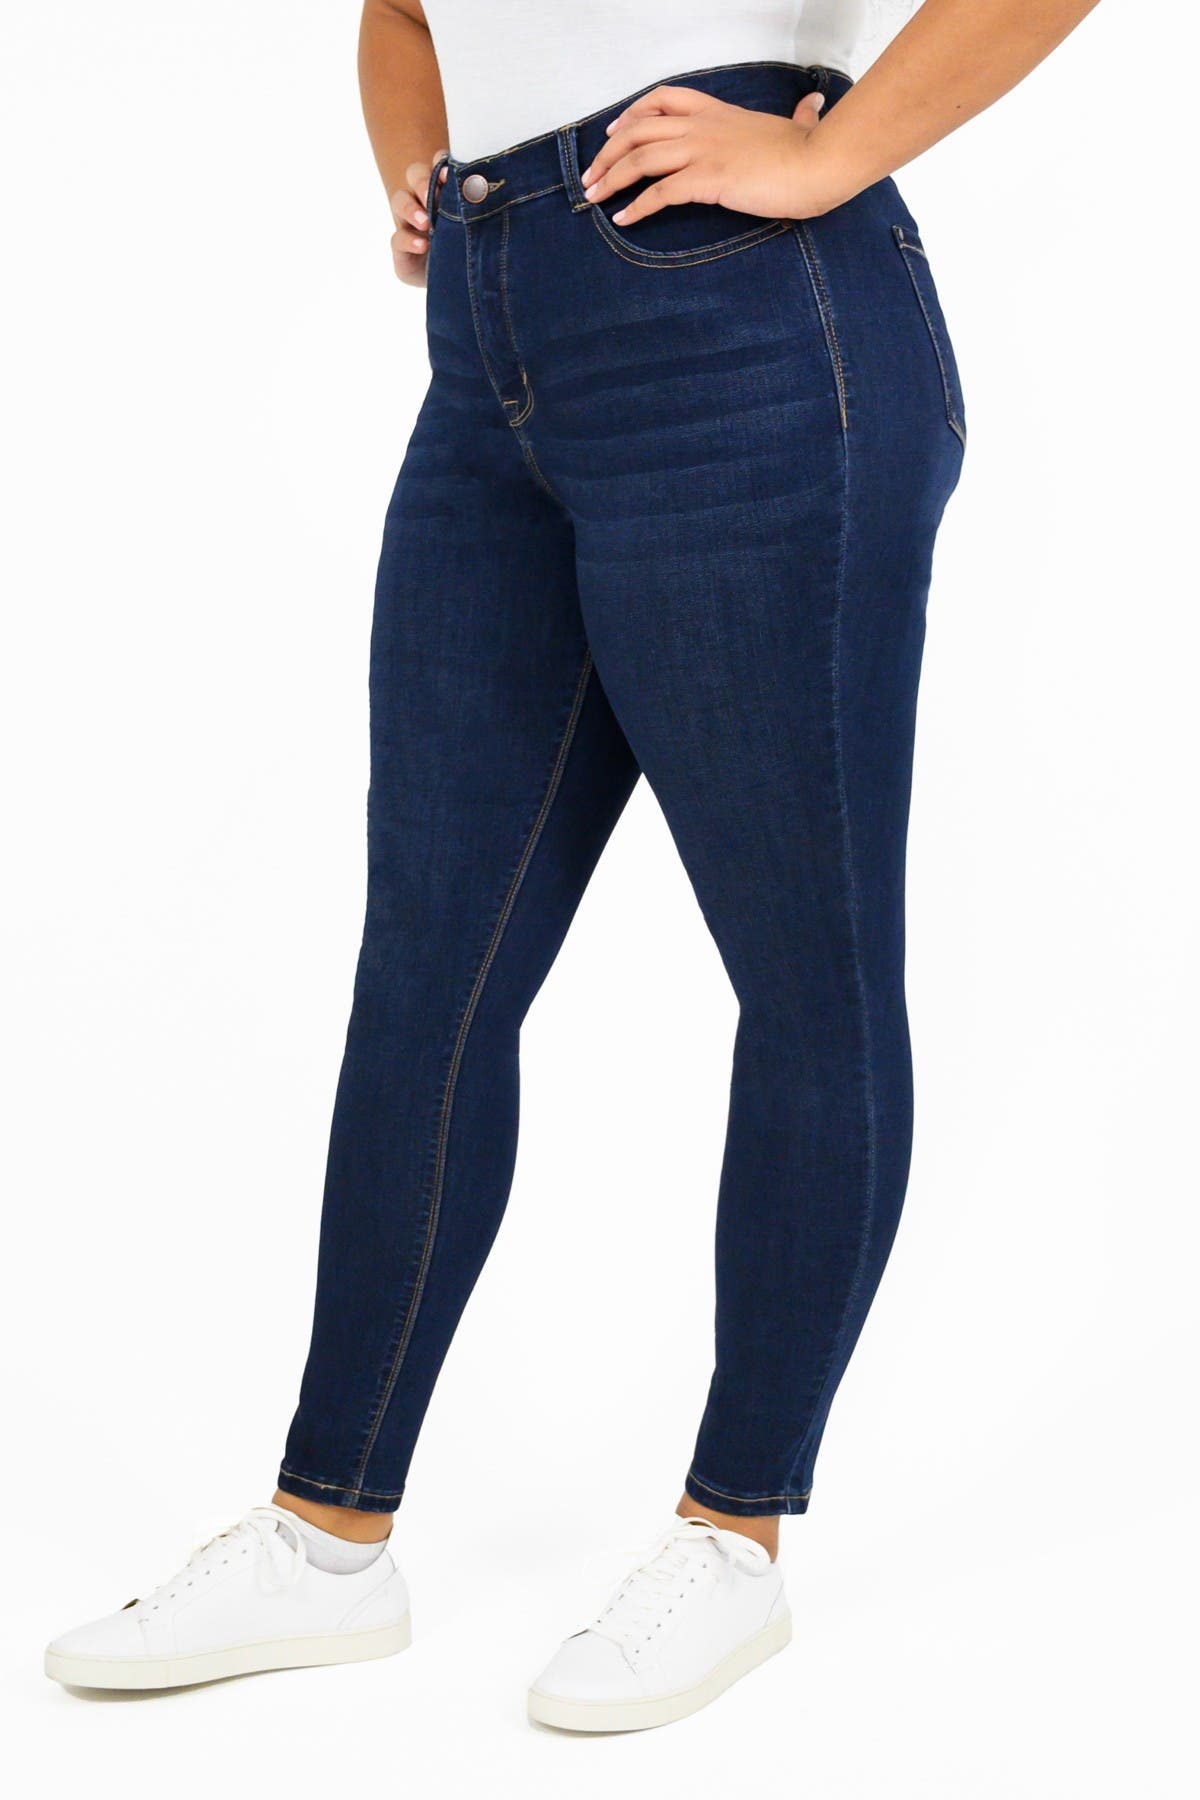 jeans curve appeal